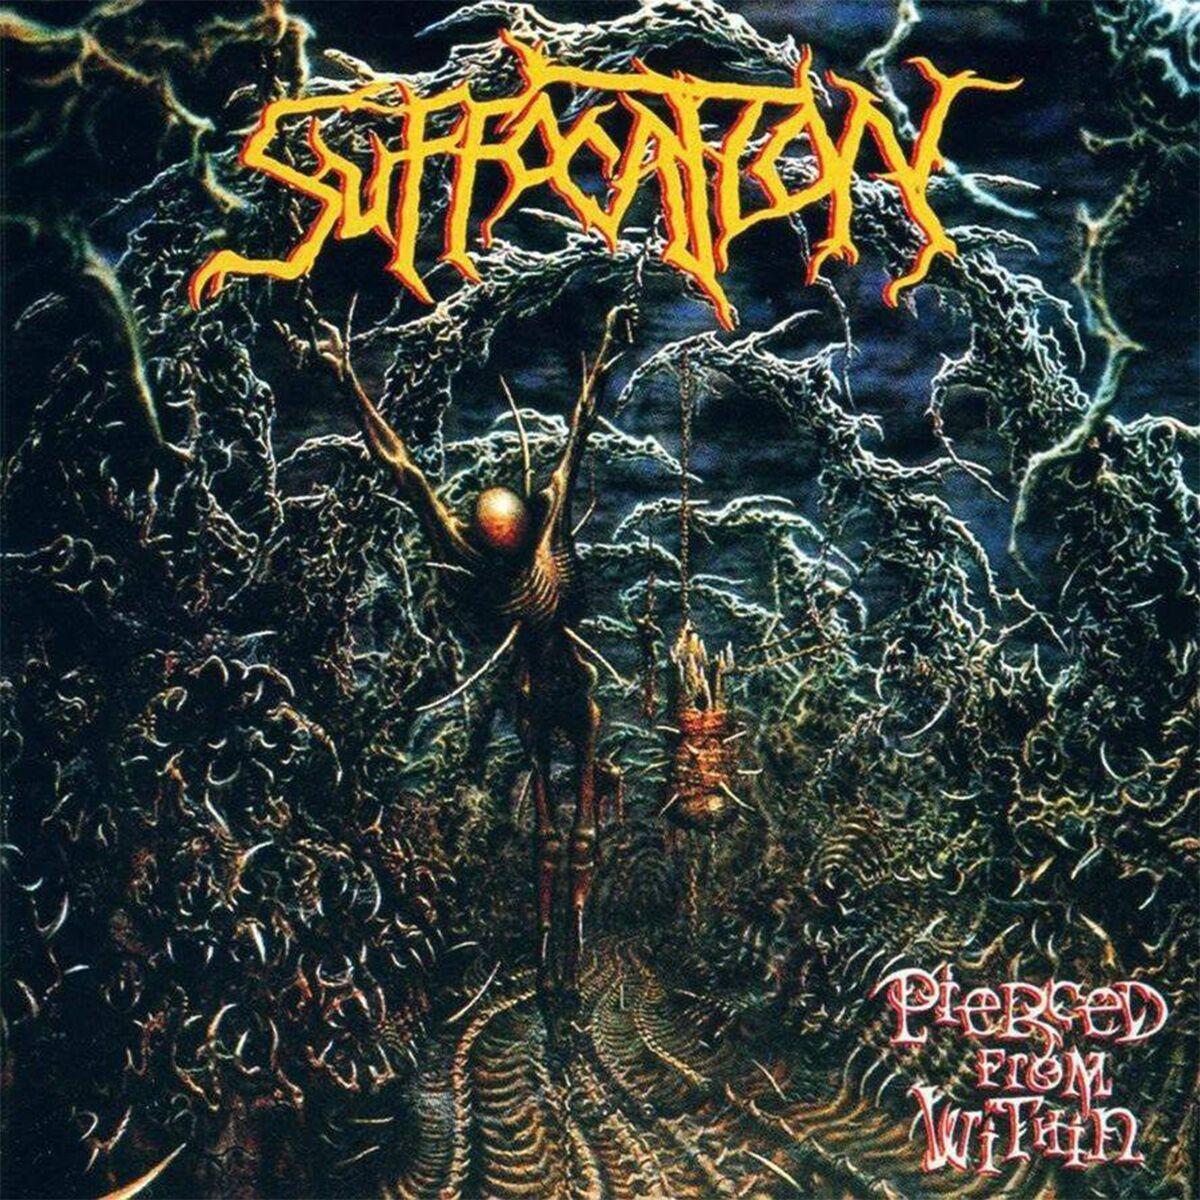 Suffocation Pierced From Within LP